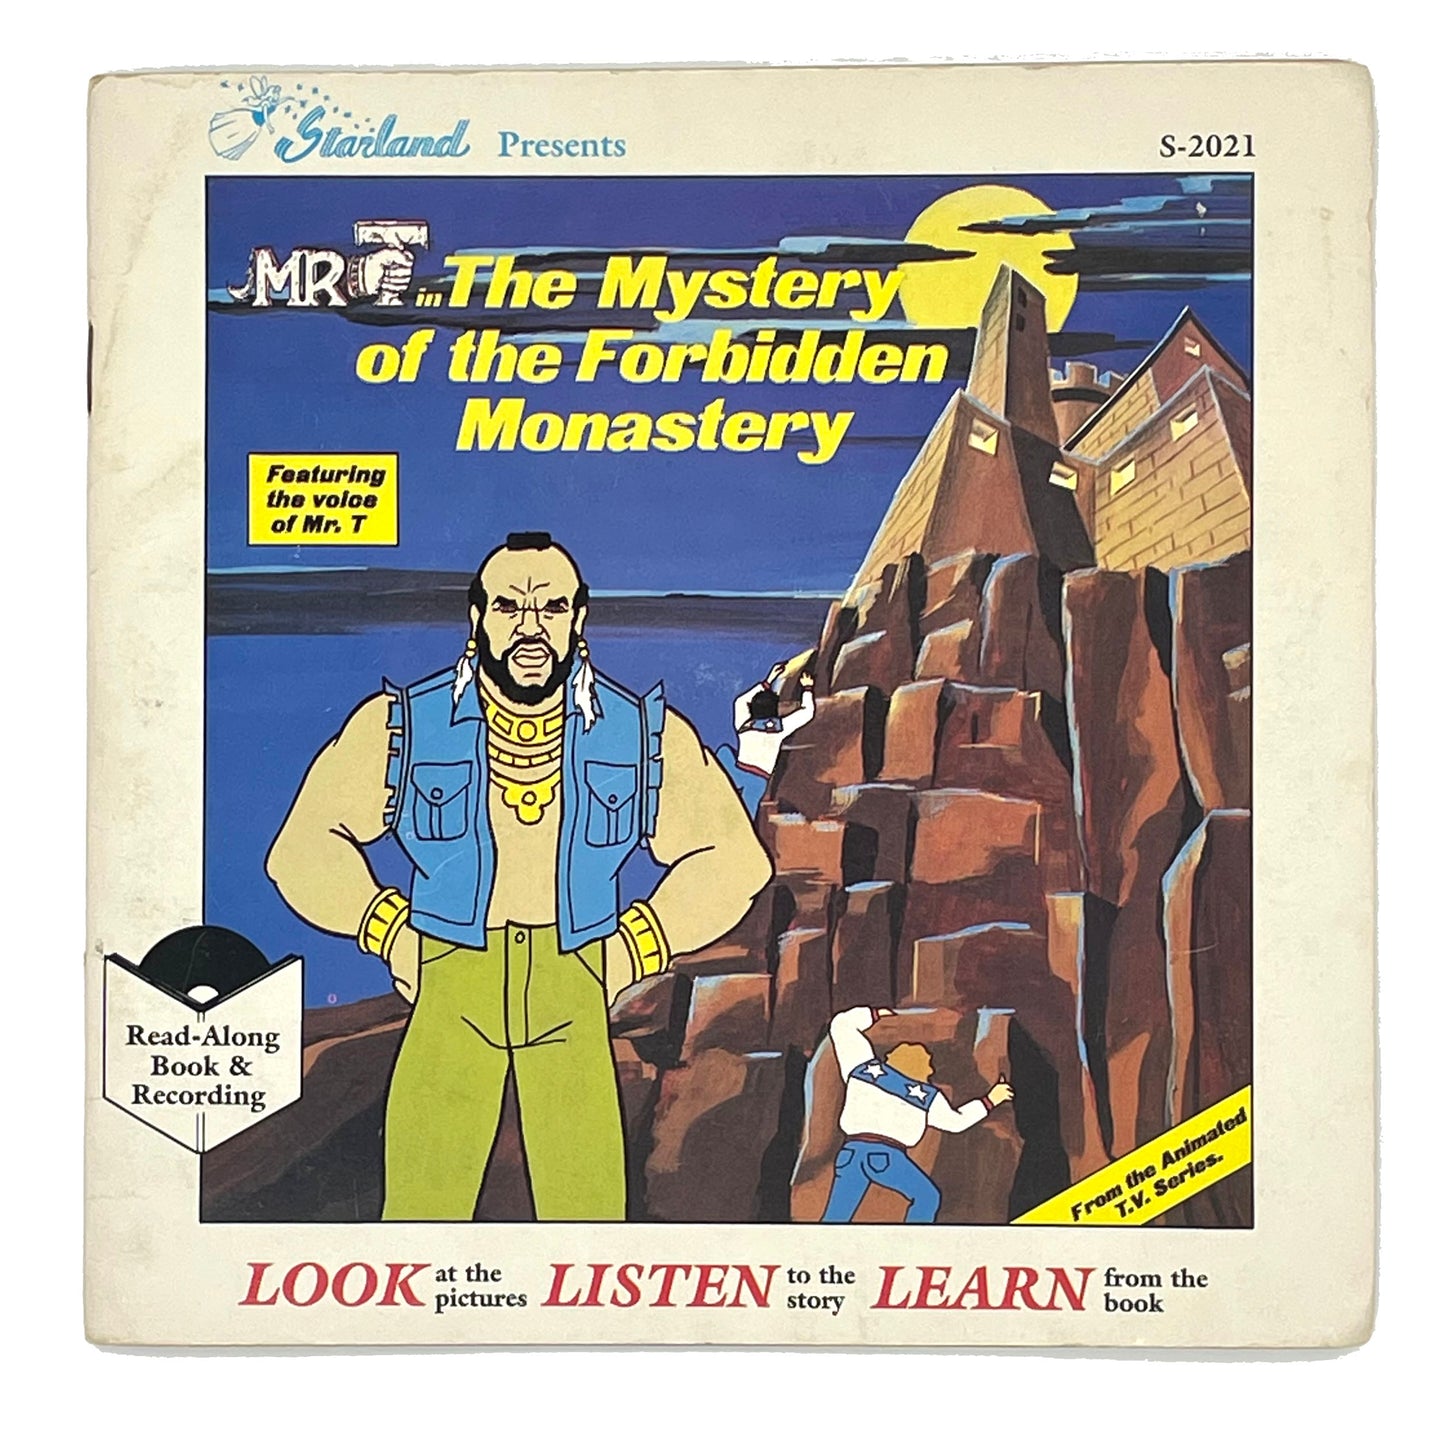 Mr. T in THE MYSTERY OF THE FORBIDDEN MONASTERY